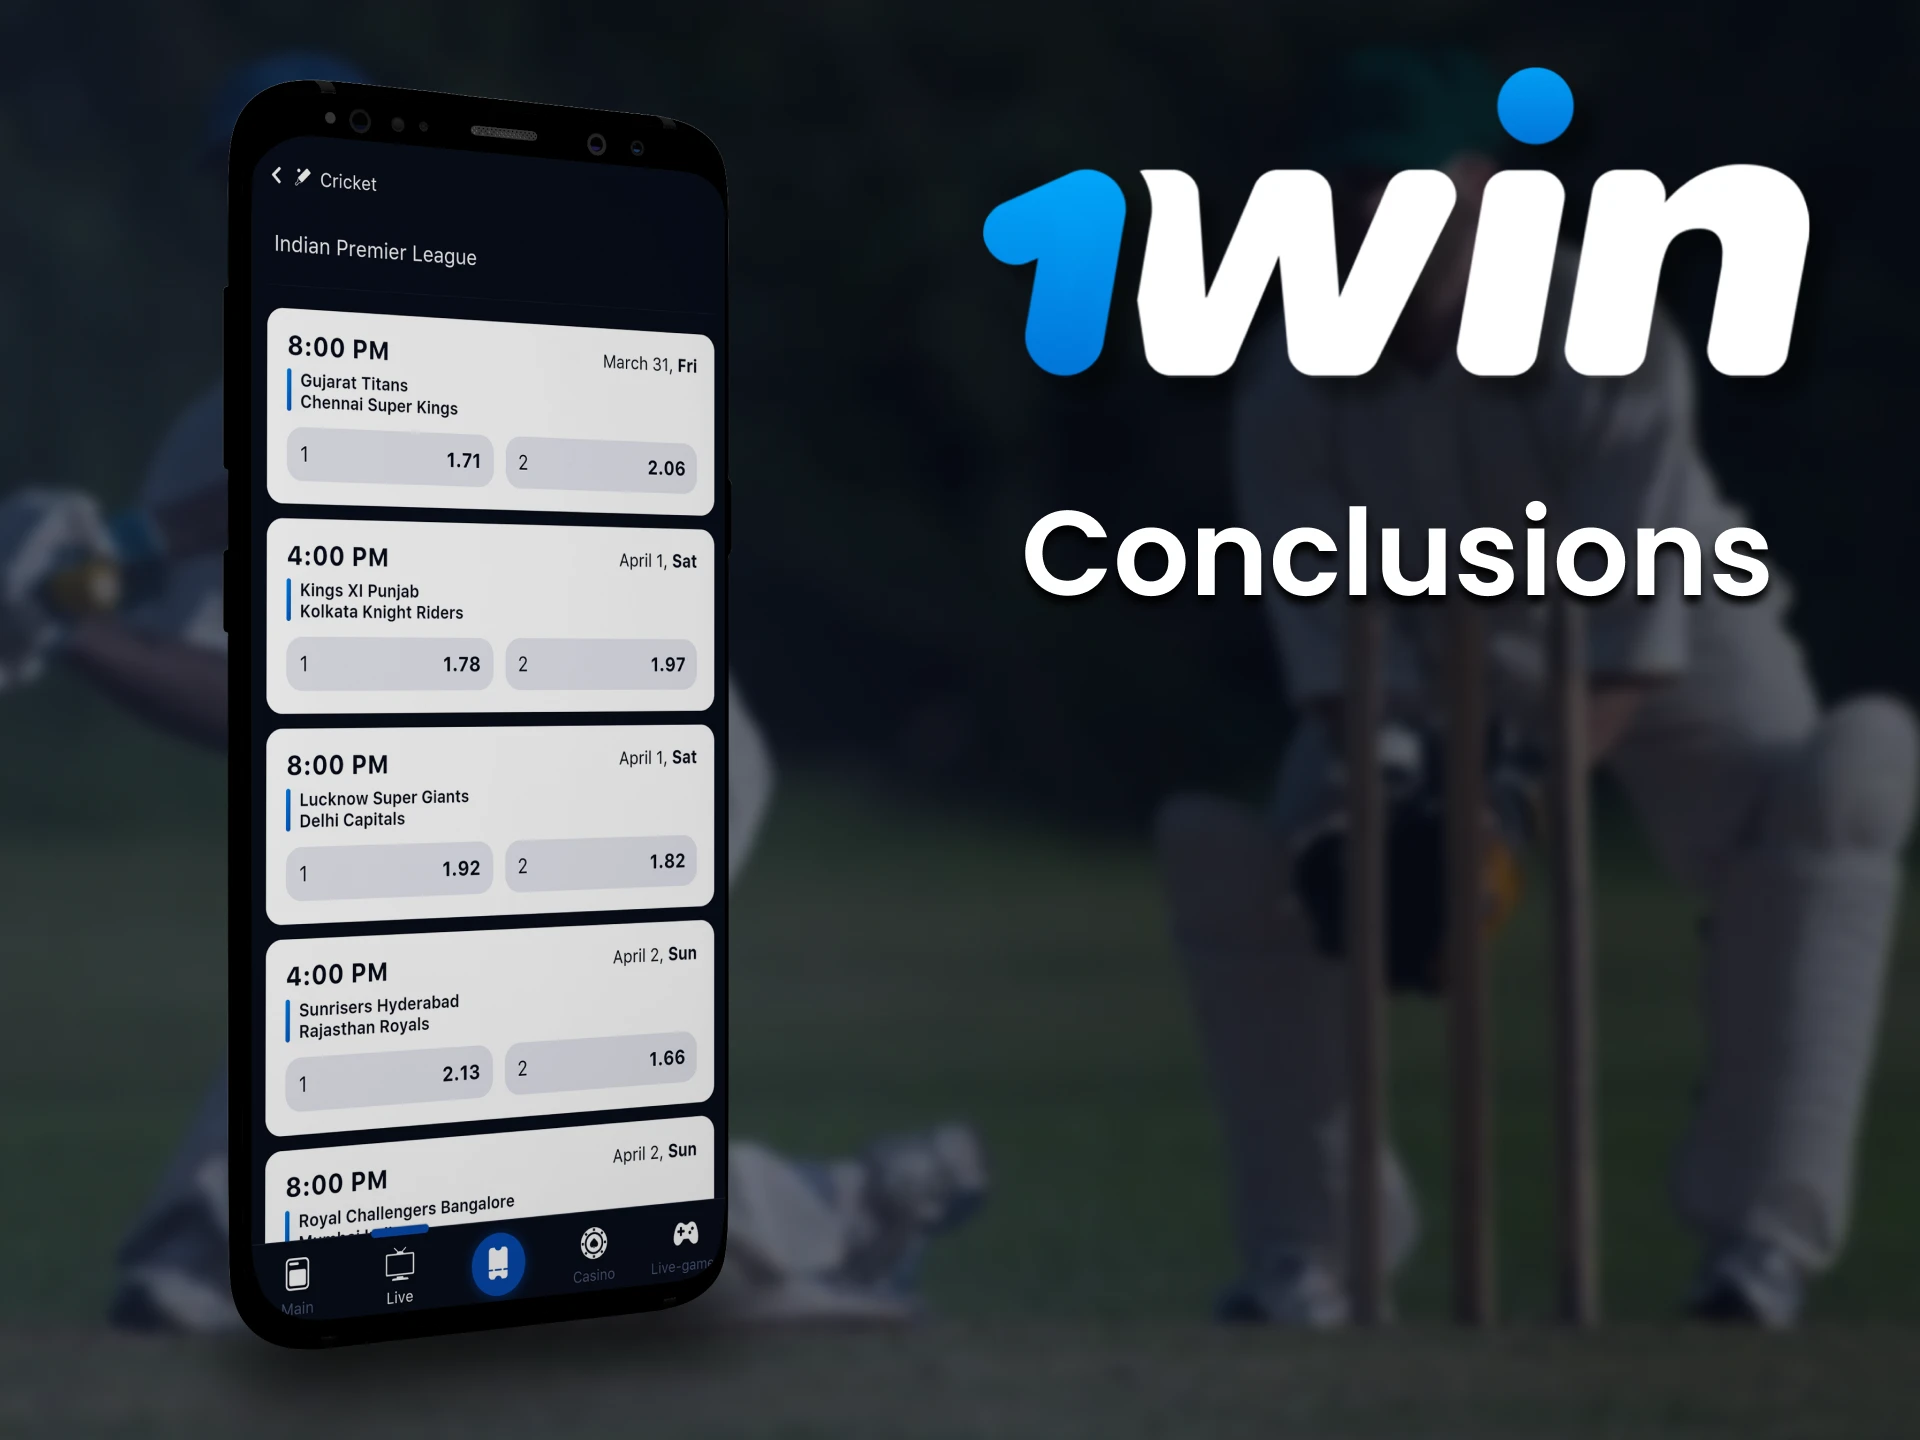 1win app for Android and iOS is ideal for sports betting and casino games.